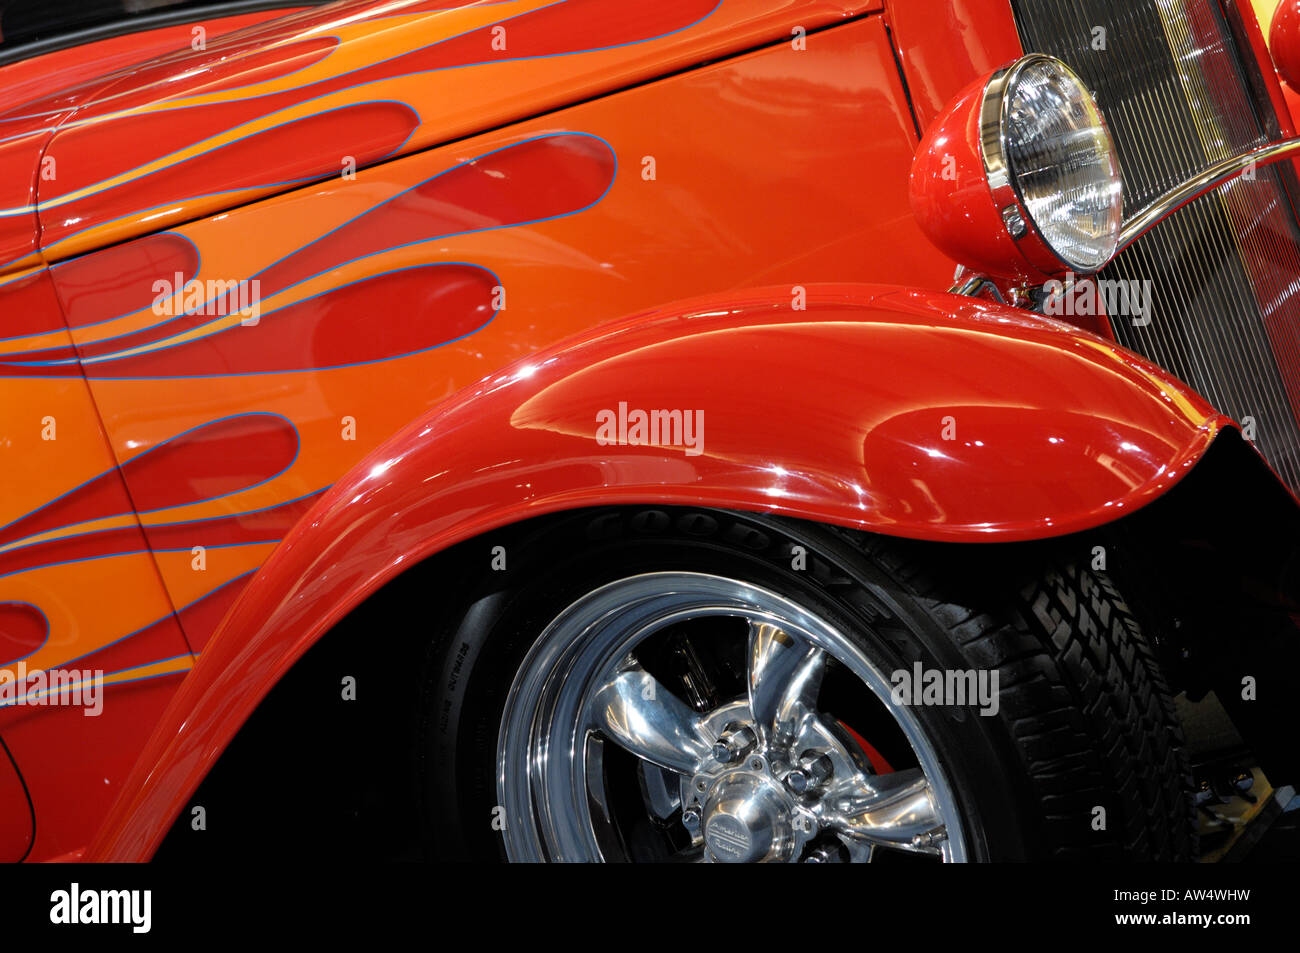 Red Hot rod Ford coupe Stock Photo